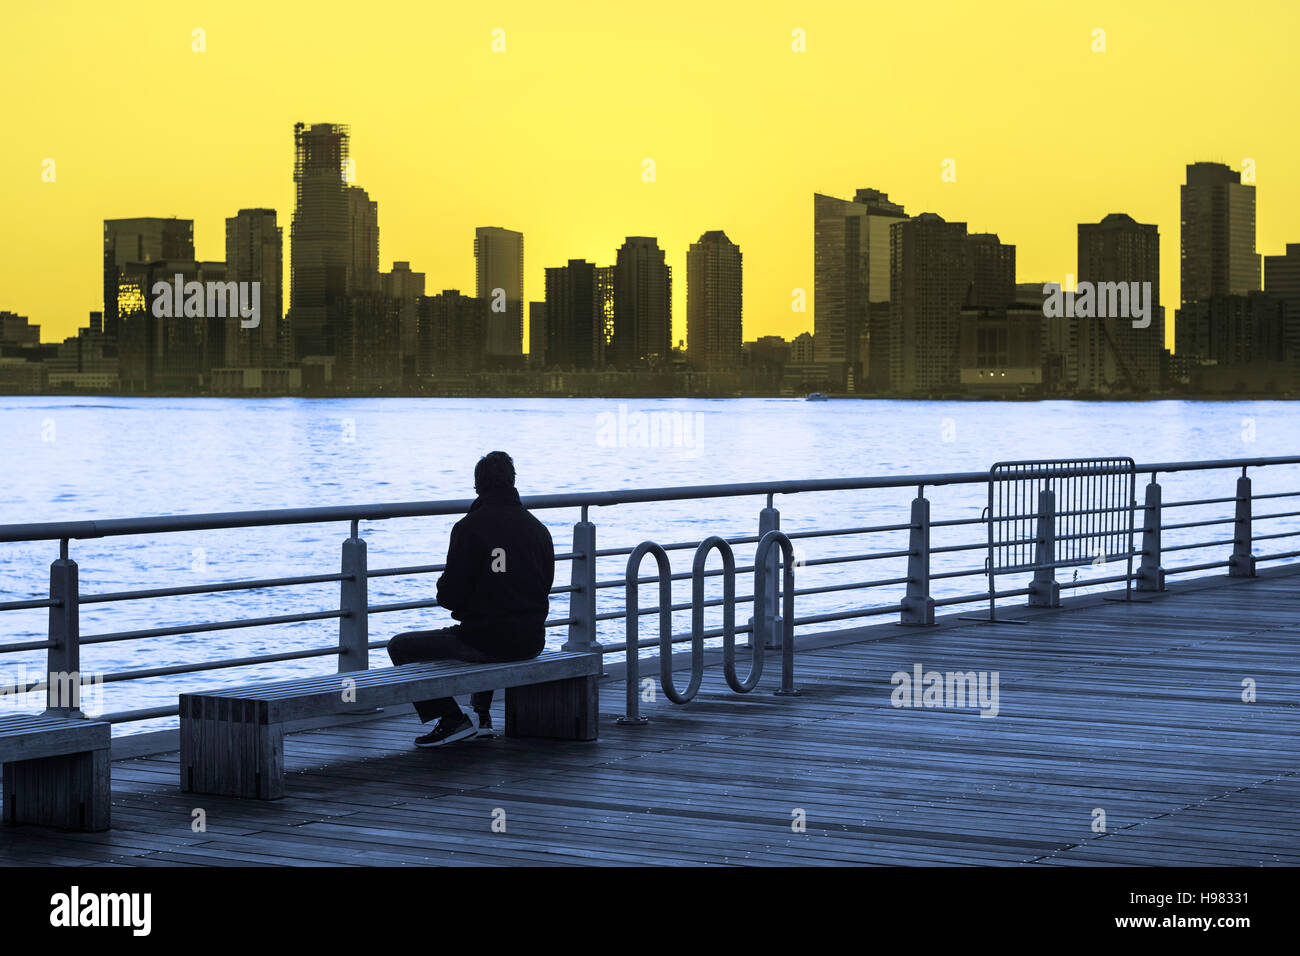 Dual-tone image of a man sitting on park bench watching the sunset over Hudson River in New York City Stock Photo